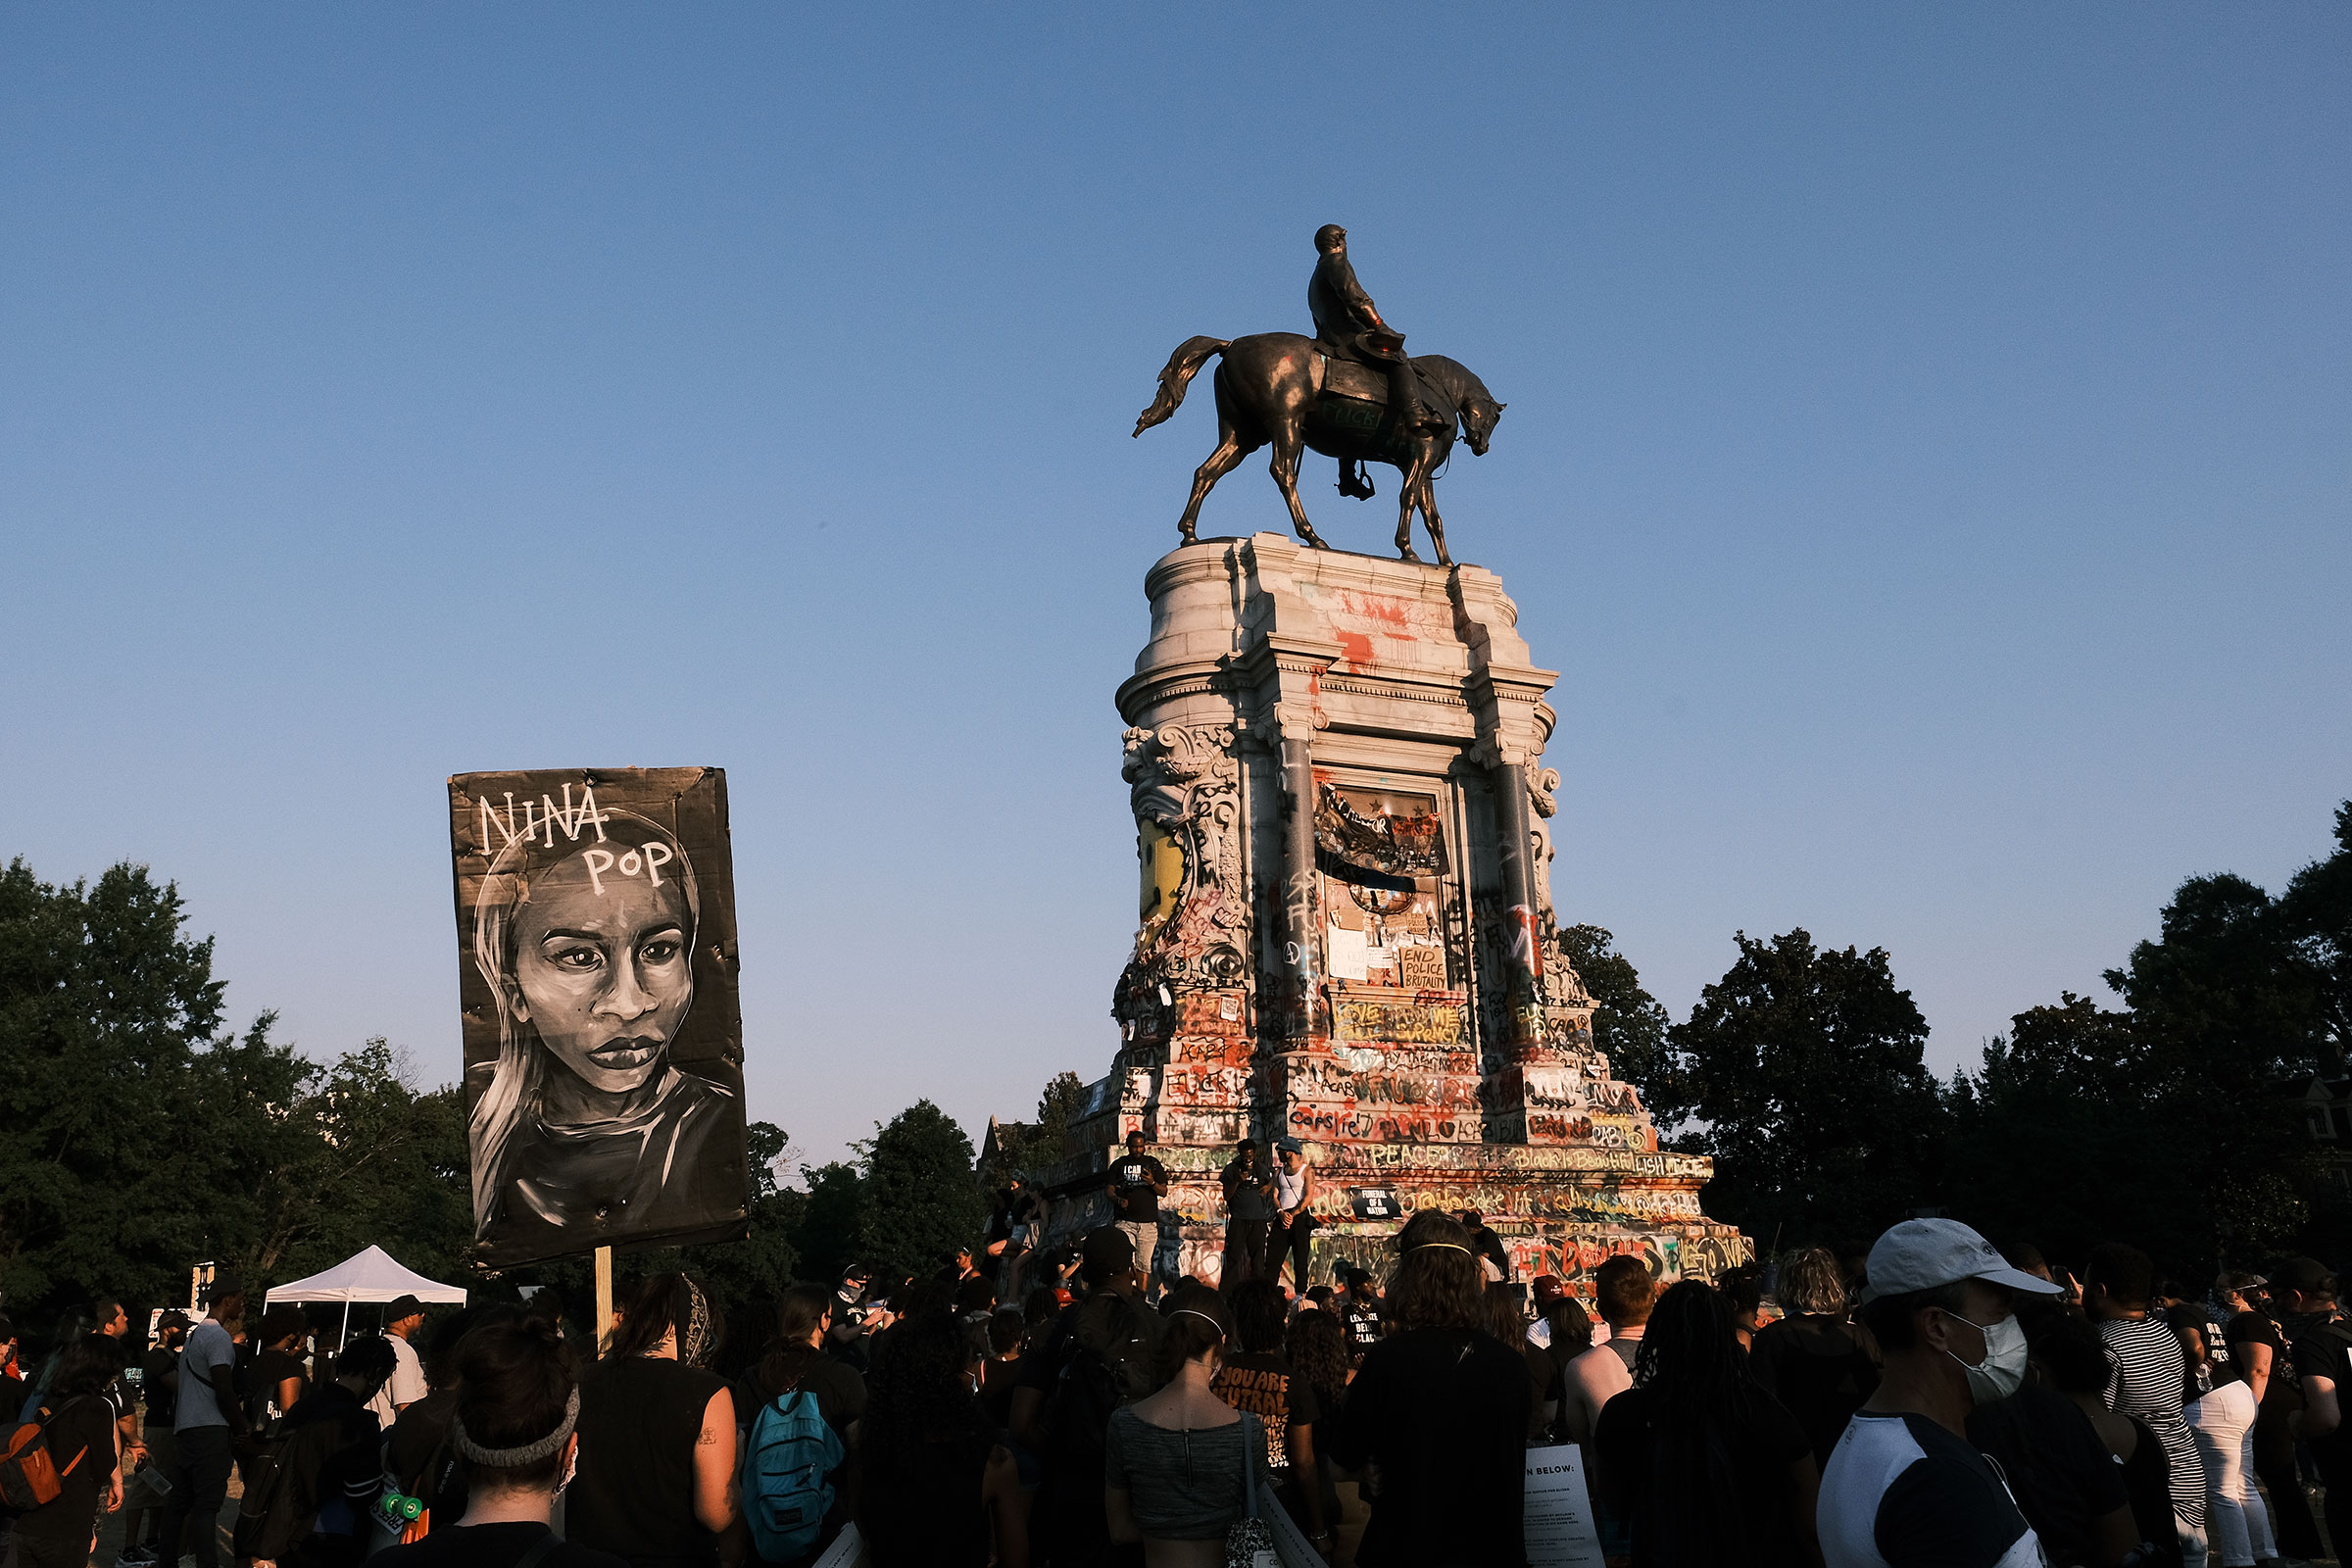 A banner showing the face of Nina Pop at the Lee statue during Black Women Matter "Say Her Name" march on July 3, 2020 in Richmond, Virginia.